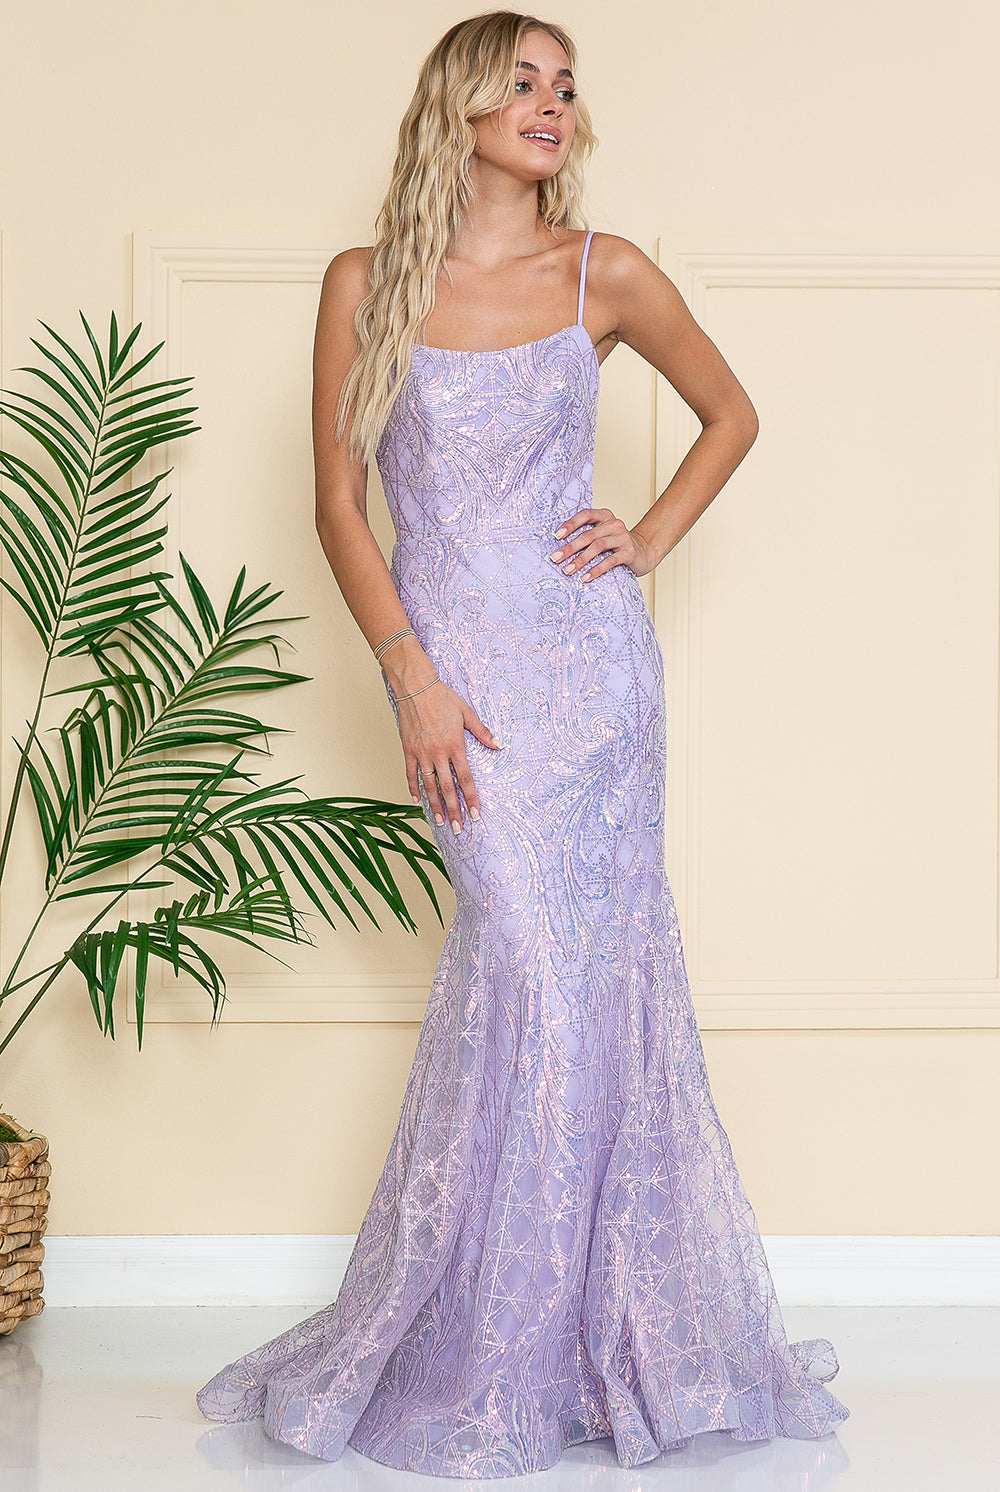 Embroidered Lace Mermaid Prom Dress-smcdress